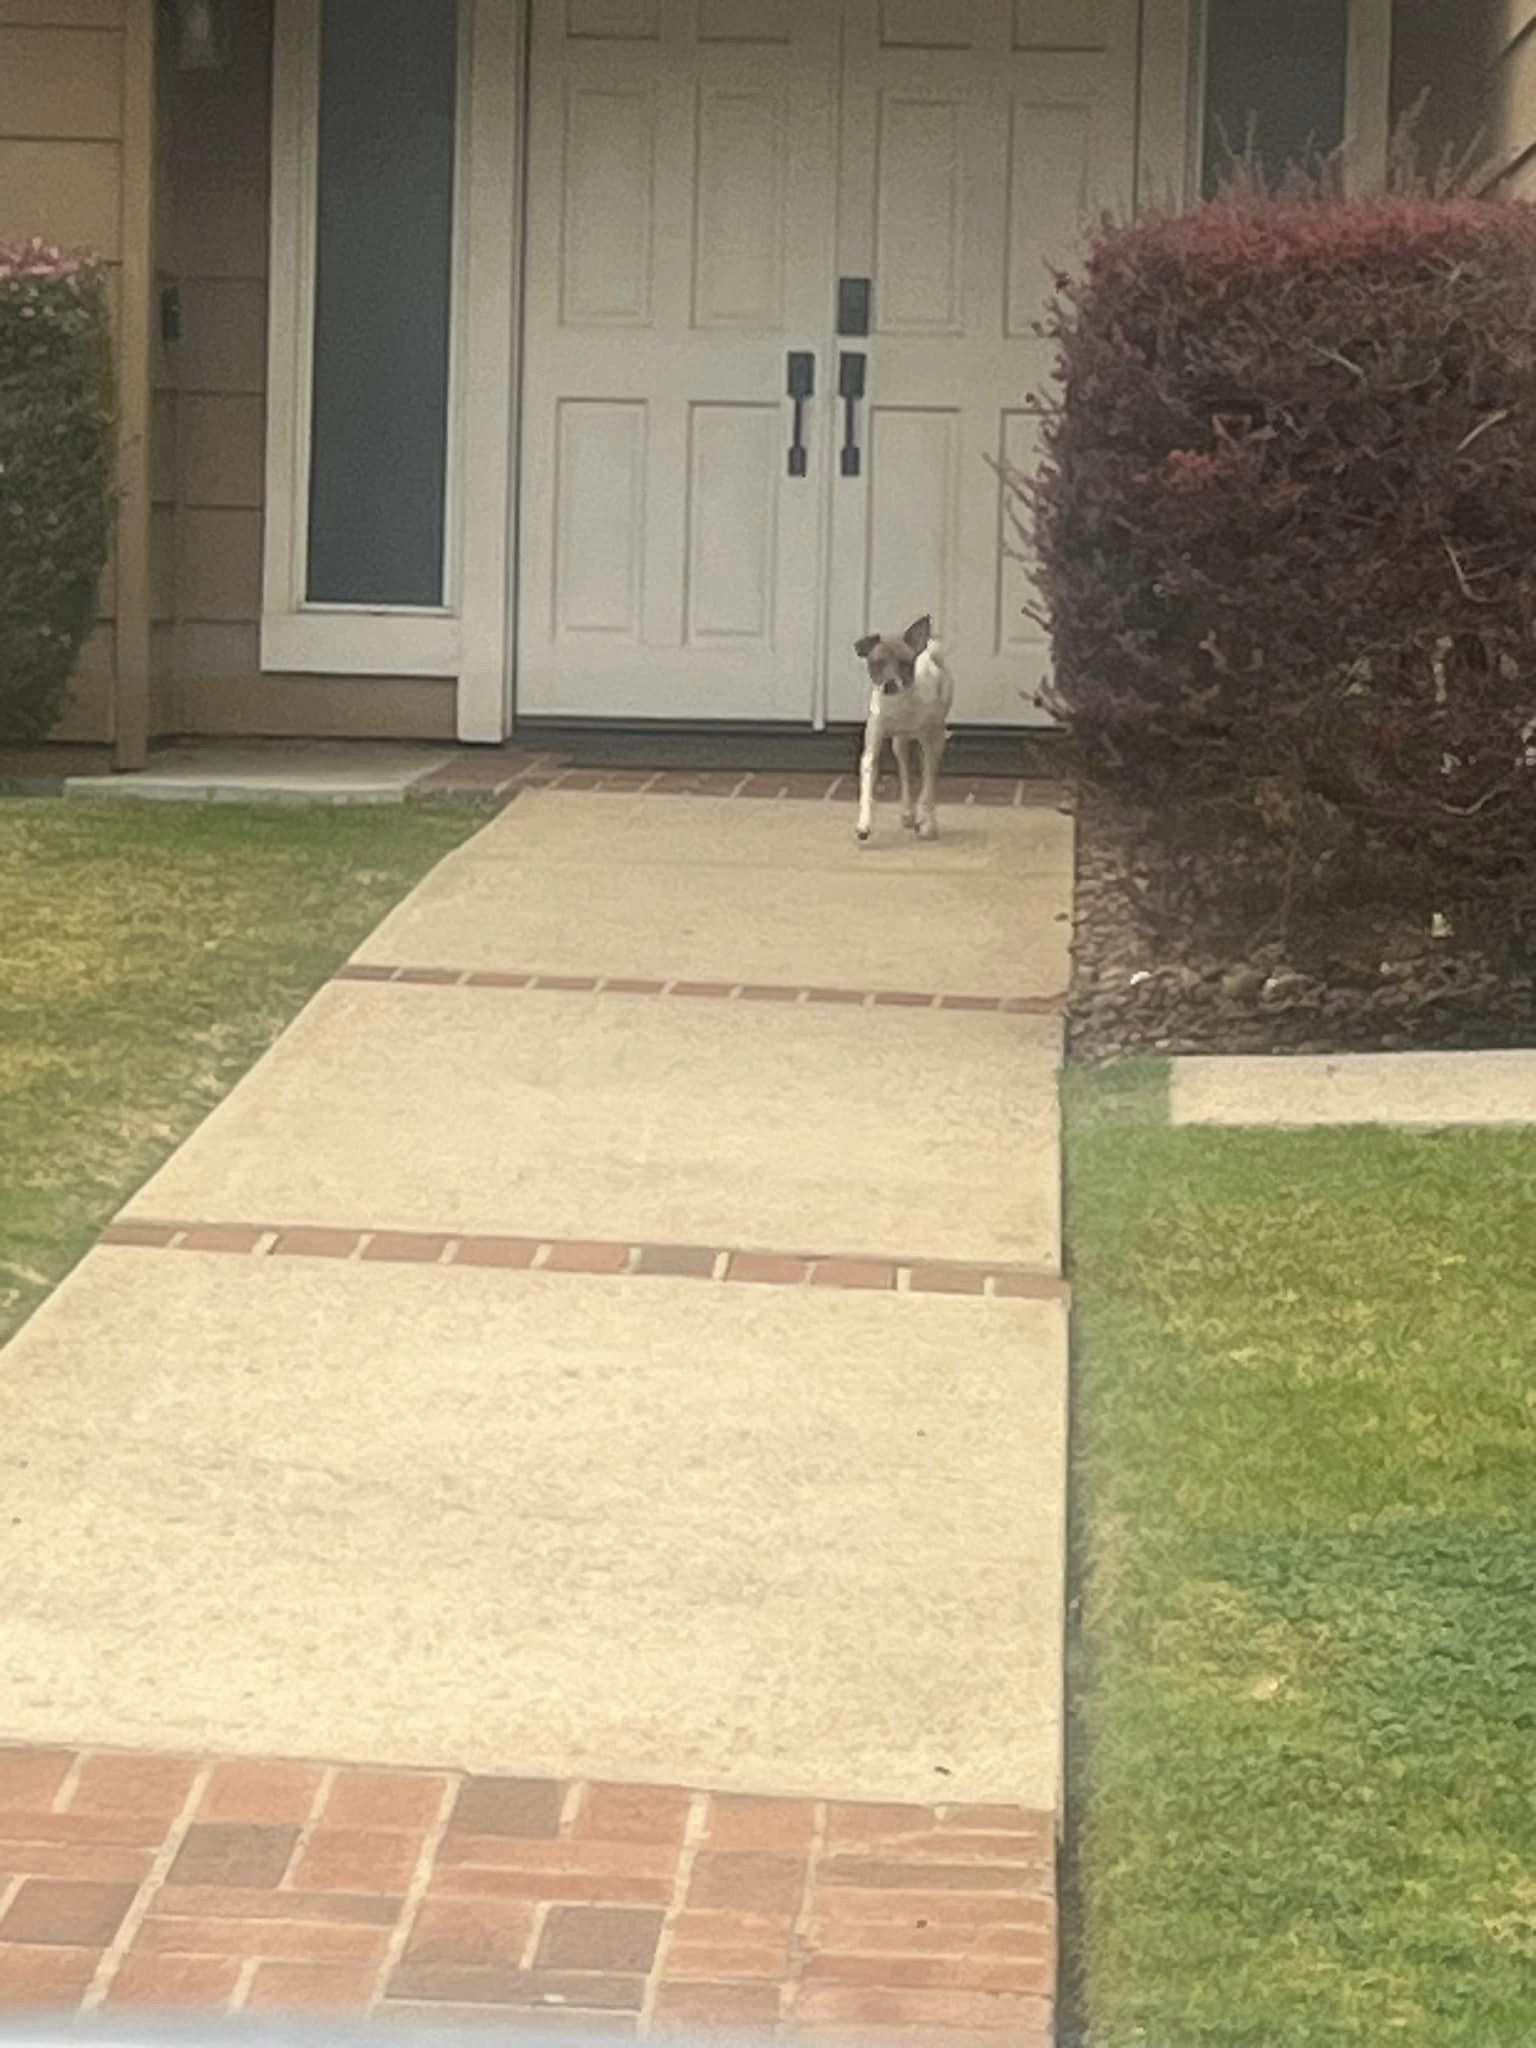 dog in front of the house